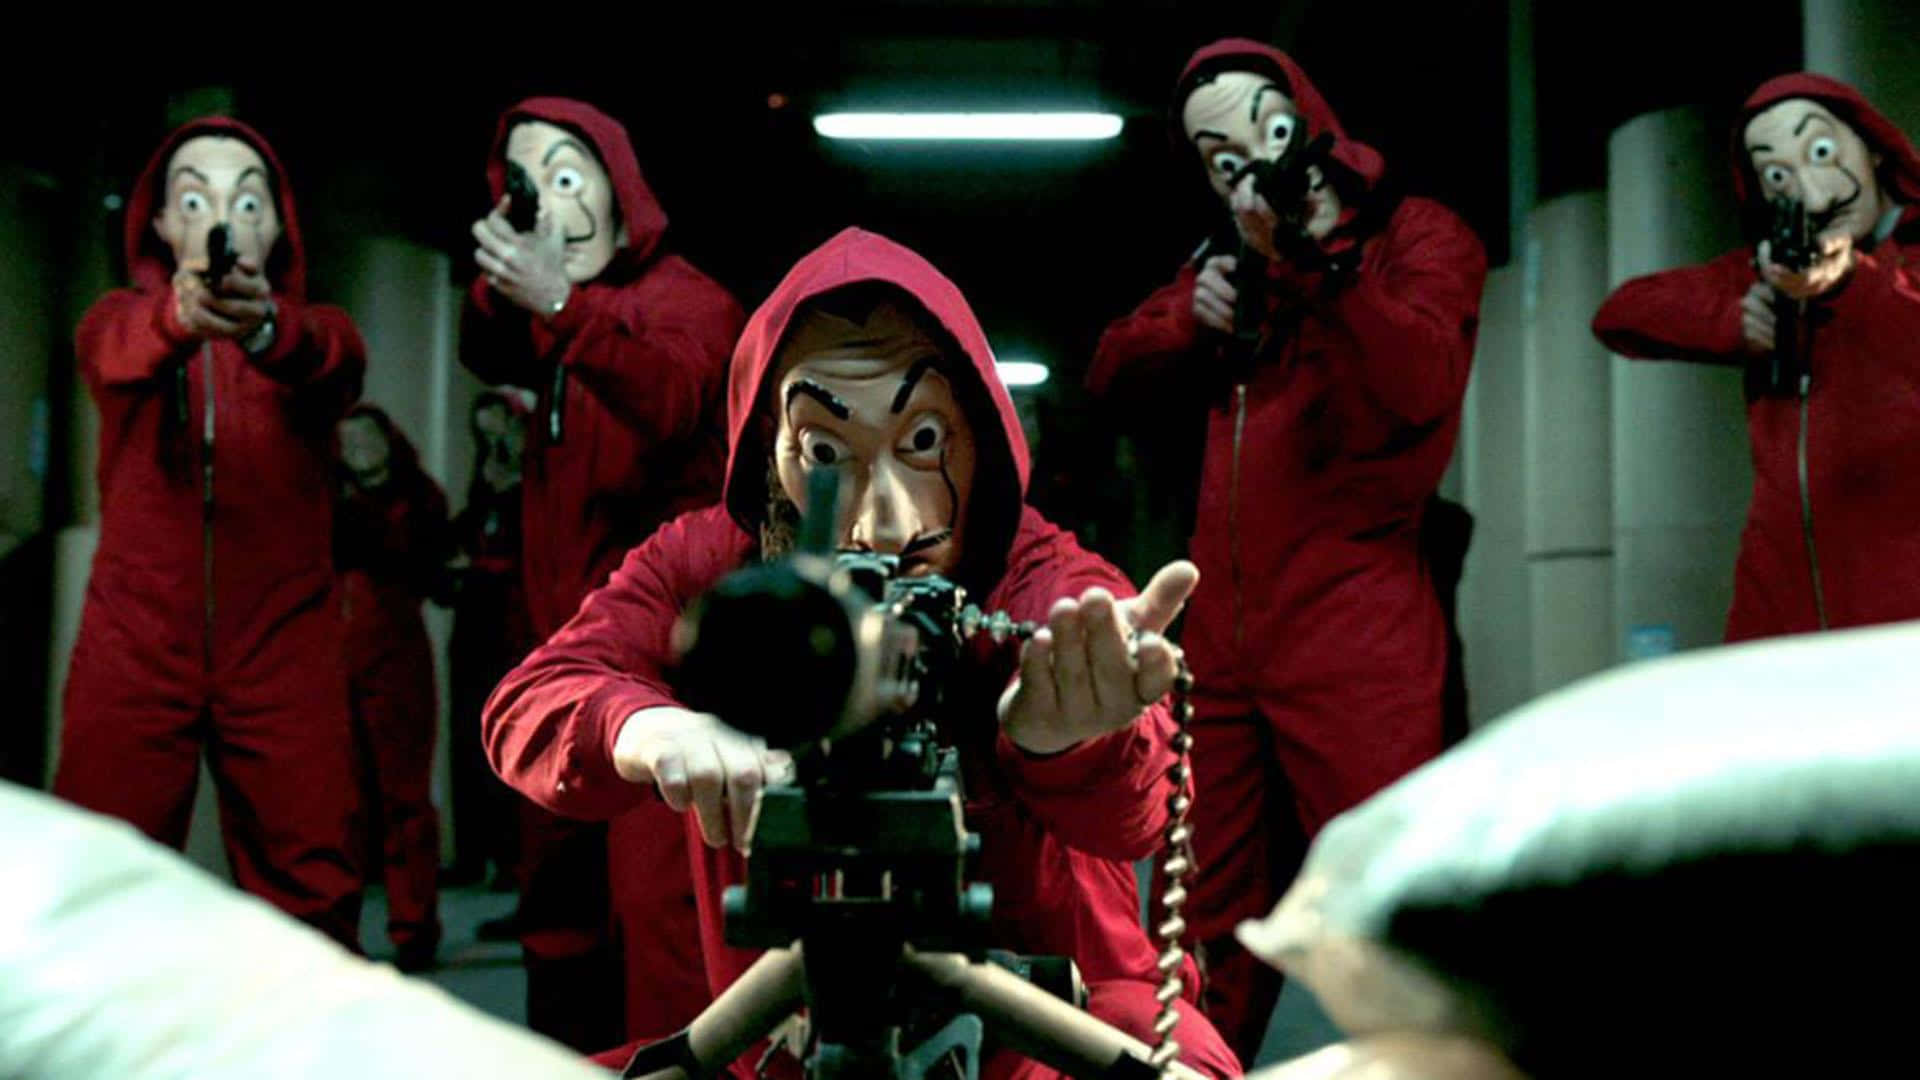 A Group Of People In Red Masks Holding A Gun